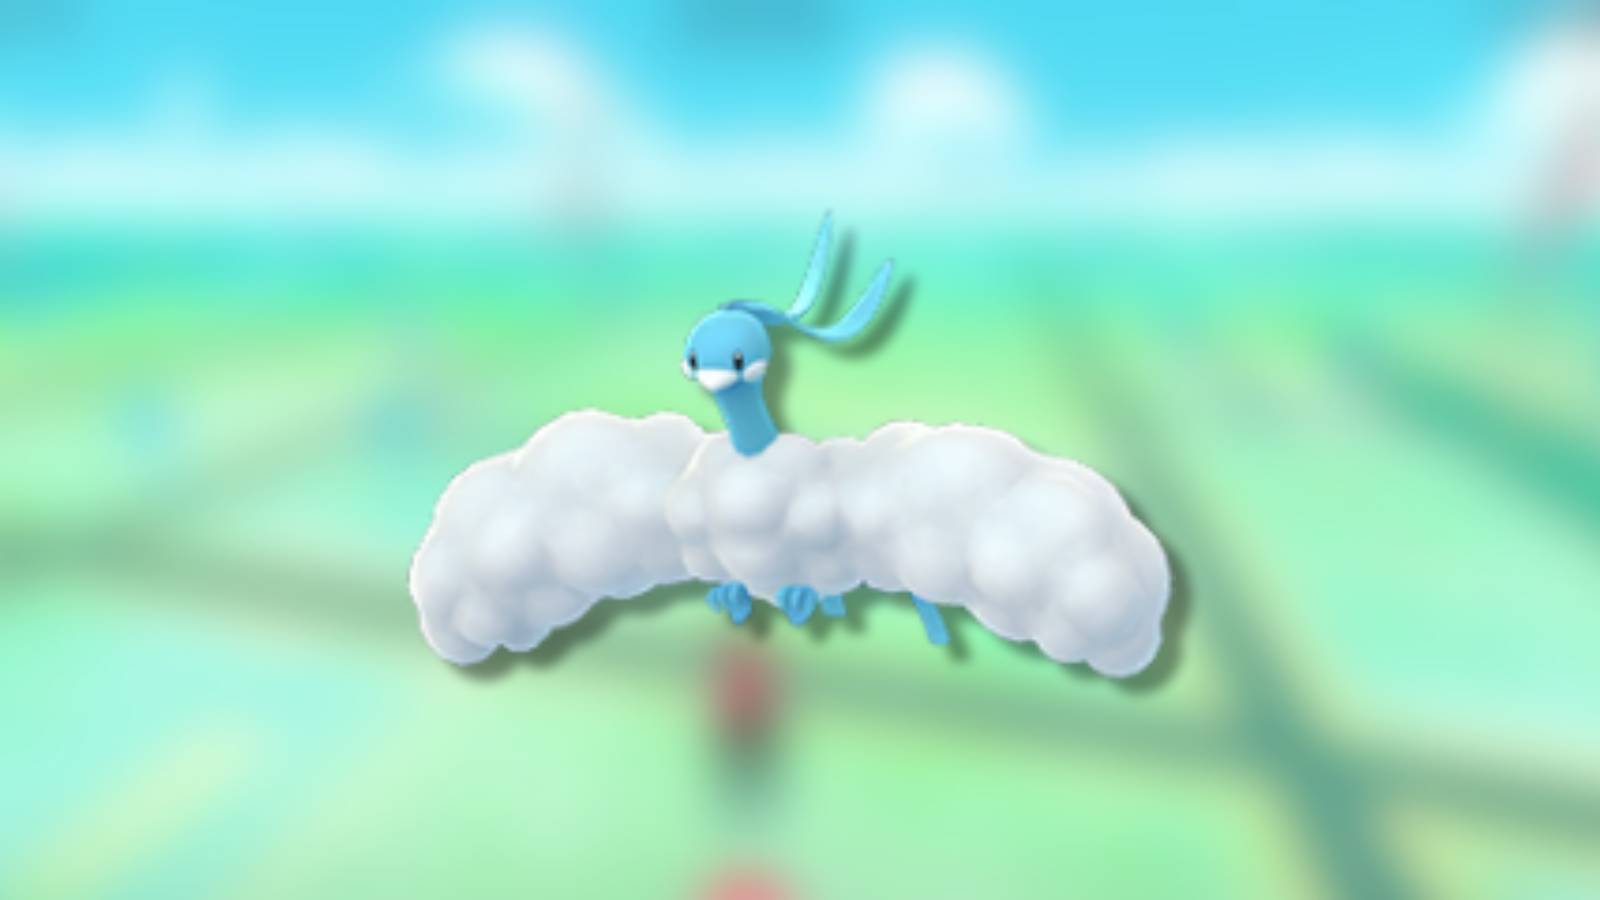 The Pokemon Altaria appears against a blurred background